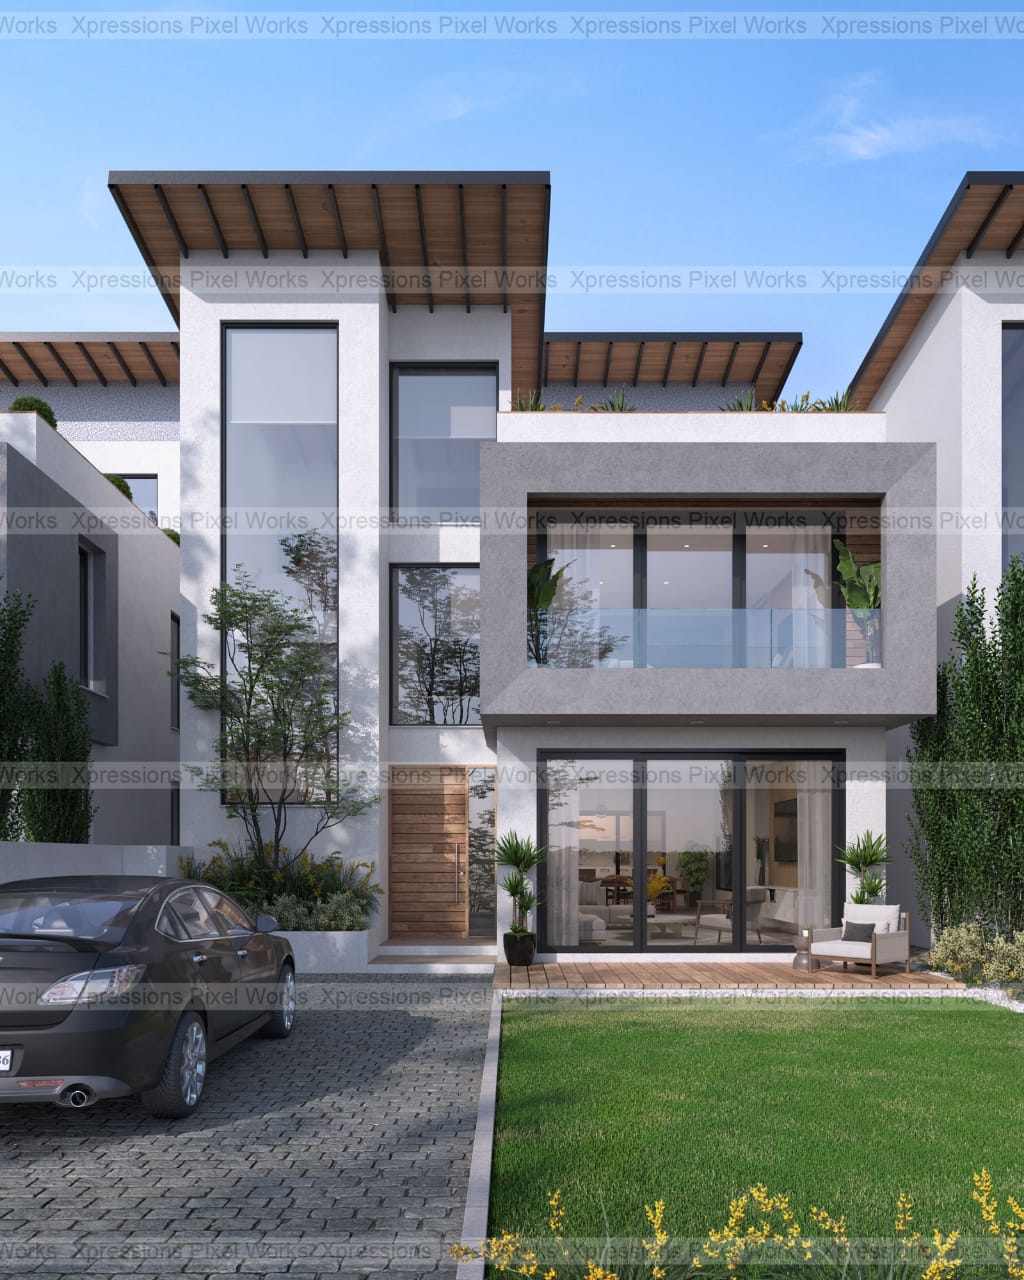 5 Bedroom Luxury Living Redefined In Gated Community